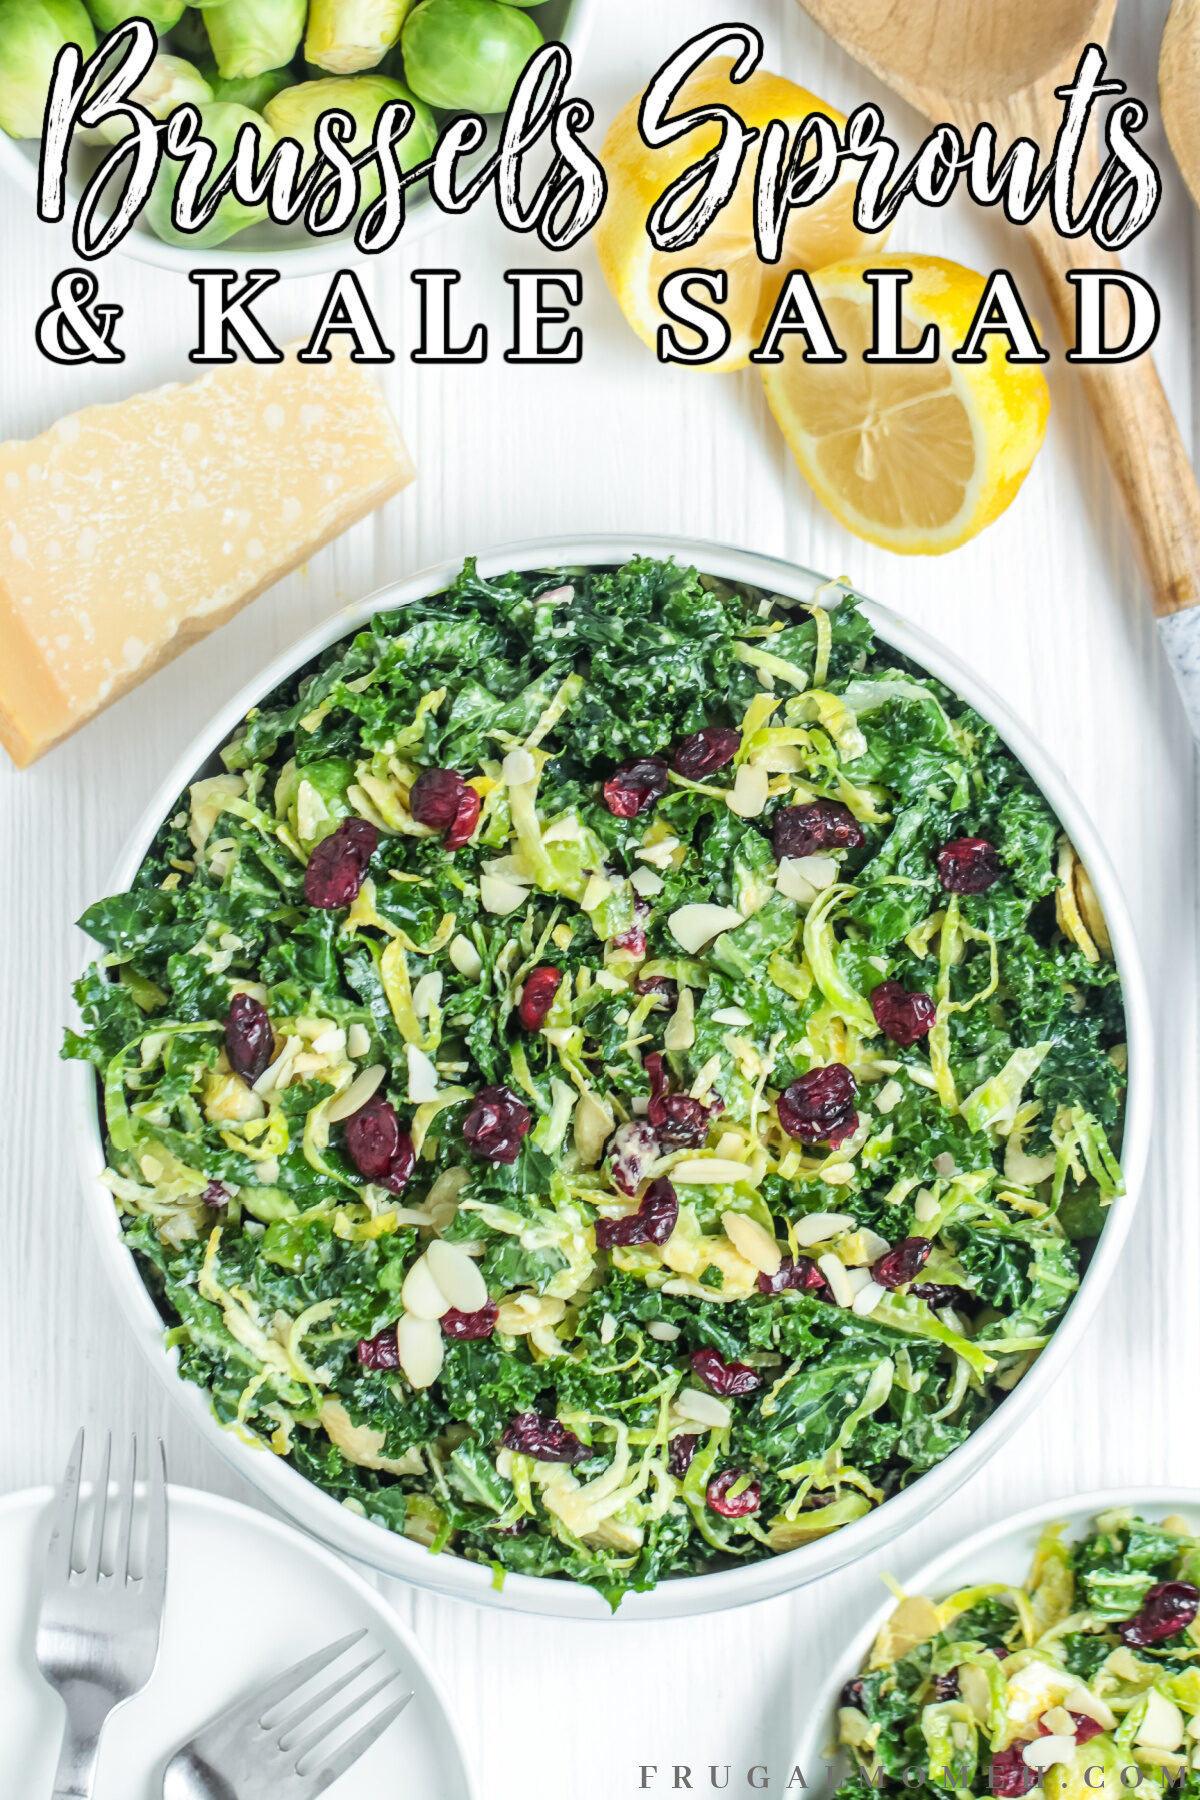 This delicious kale and Brussels sprout salad recipe is perfect for a healthy side dish or light lunch that is perfect for any occasion!